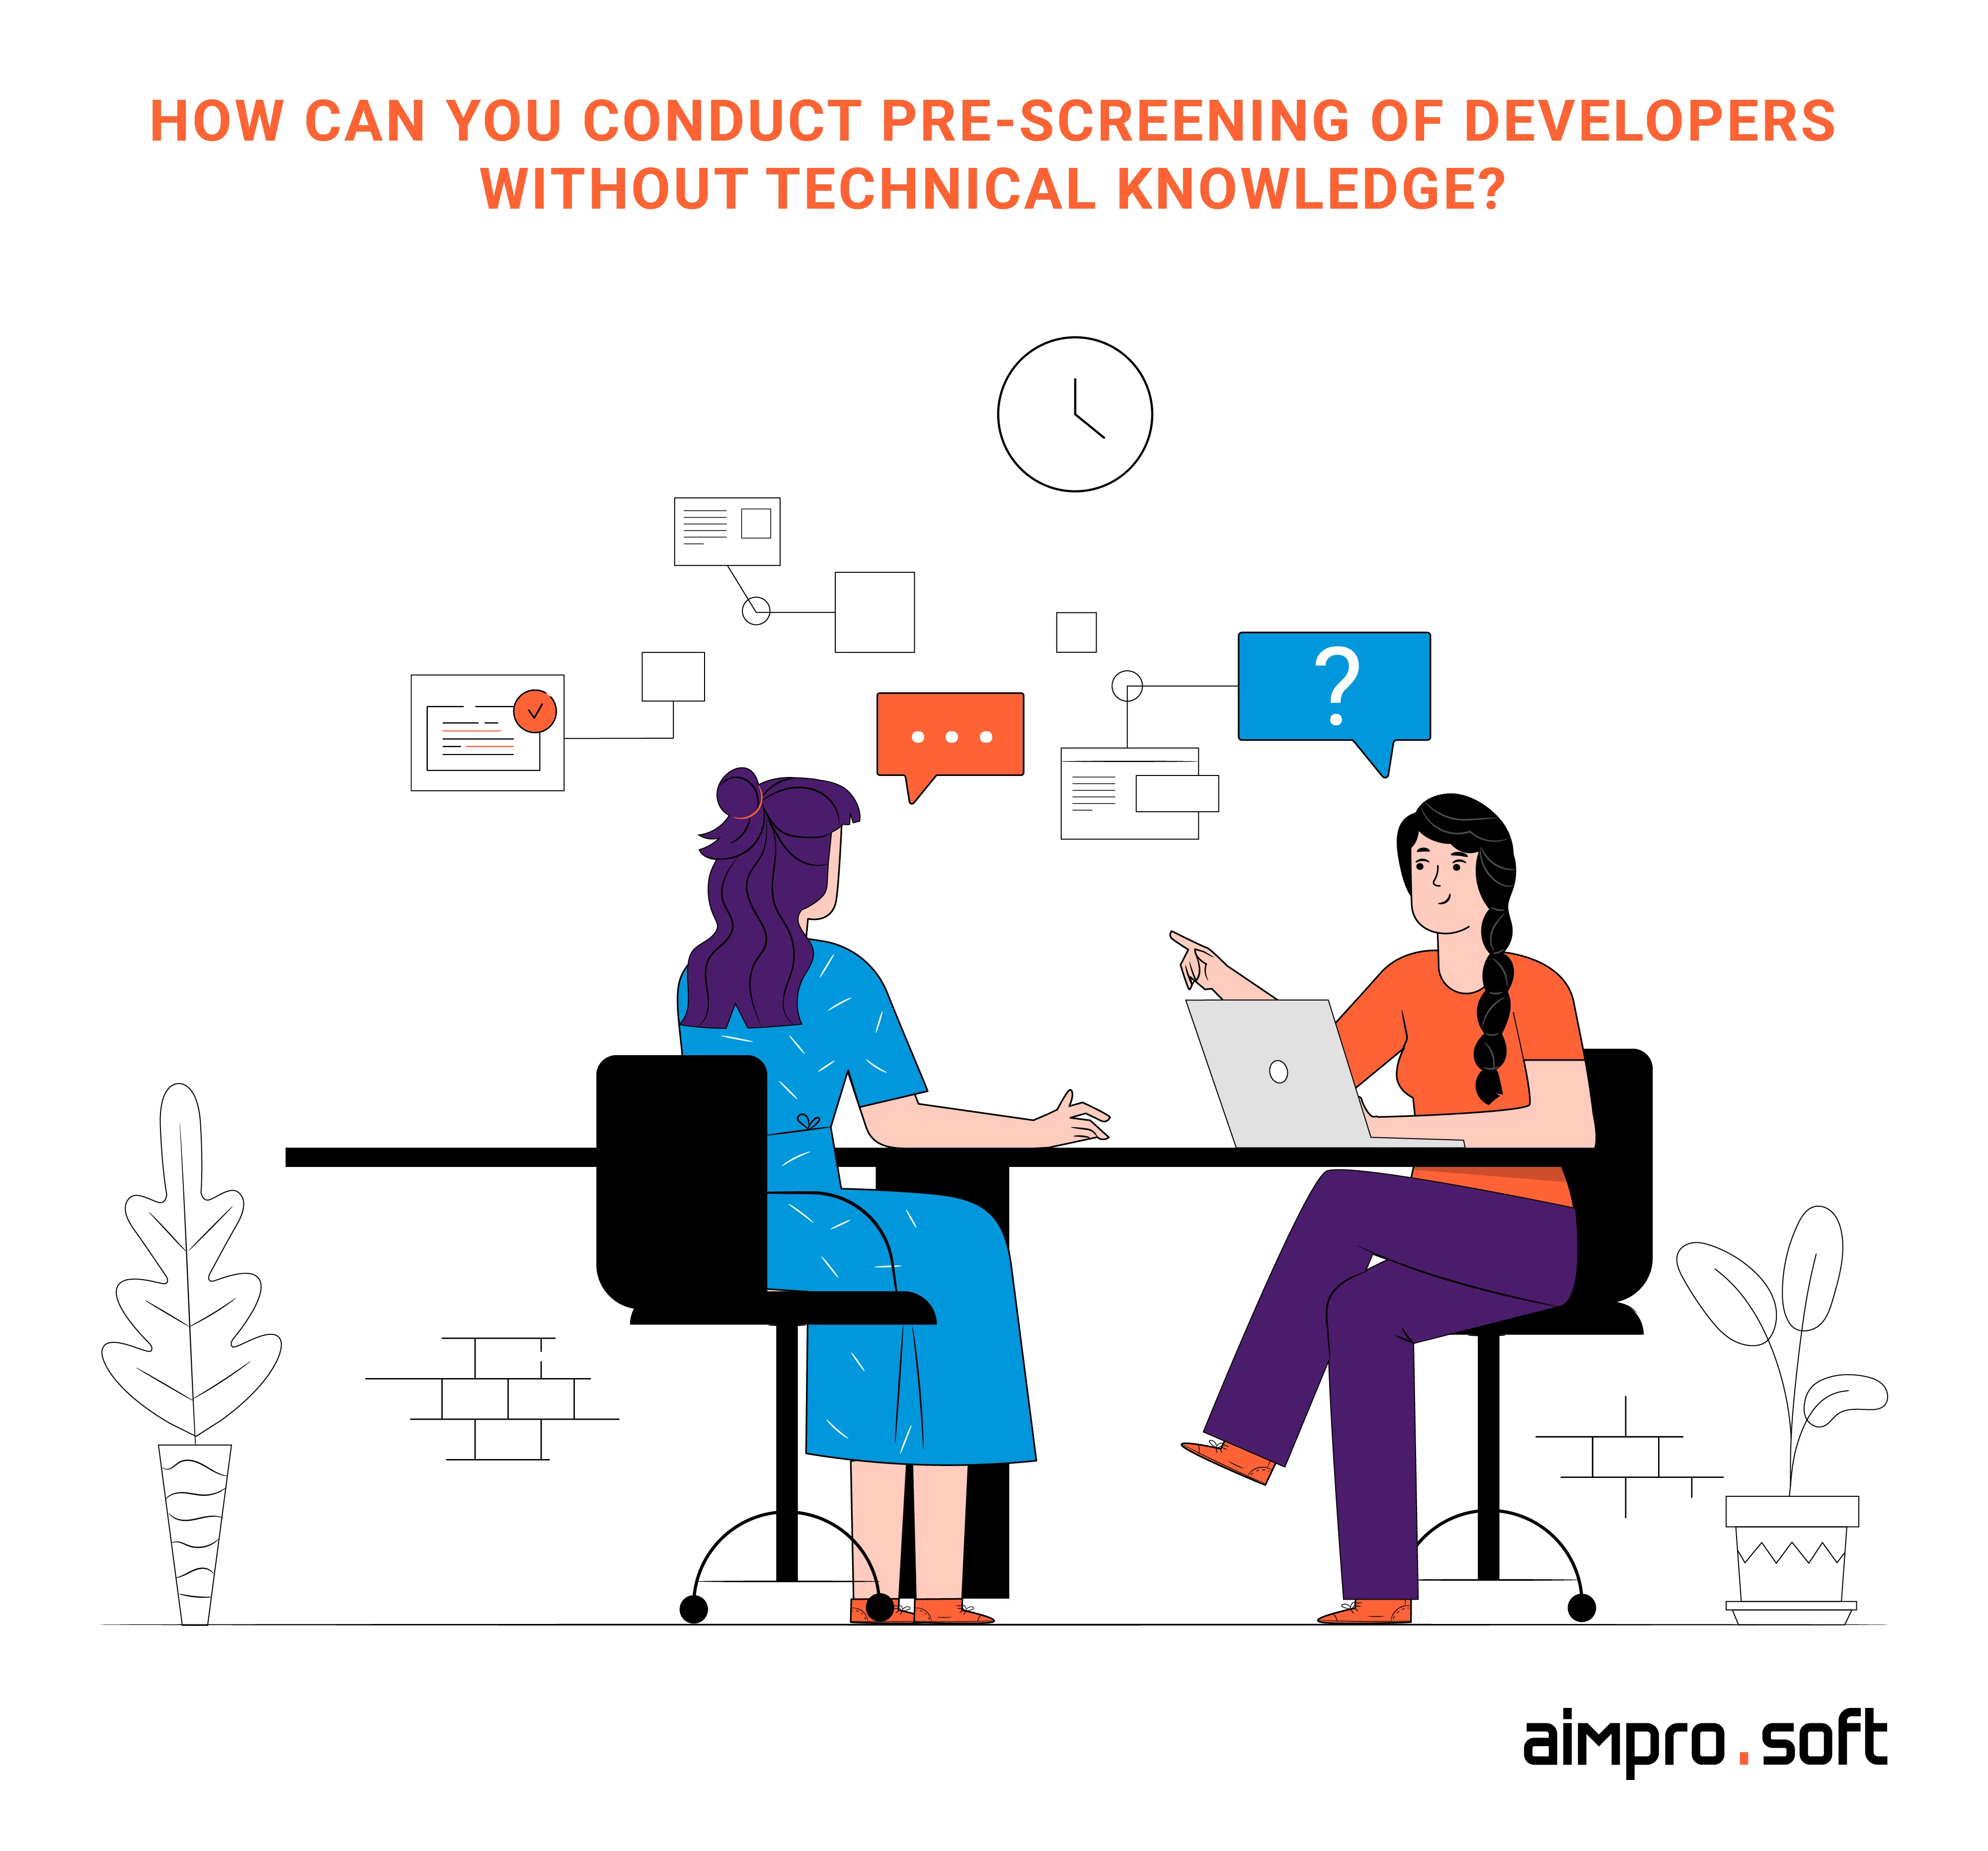 How can you conduct pre-screening of developers without technical knowledge?